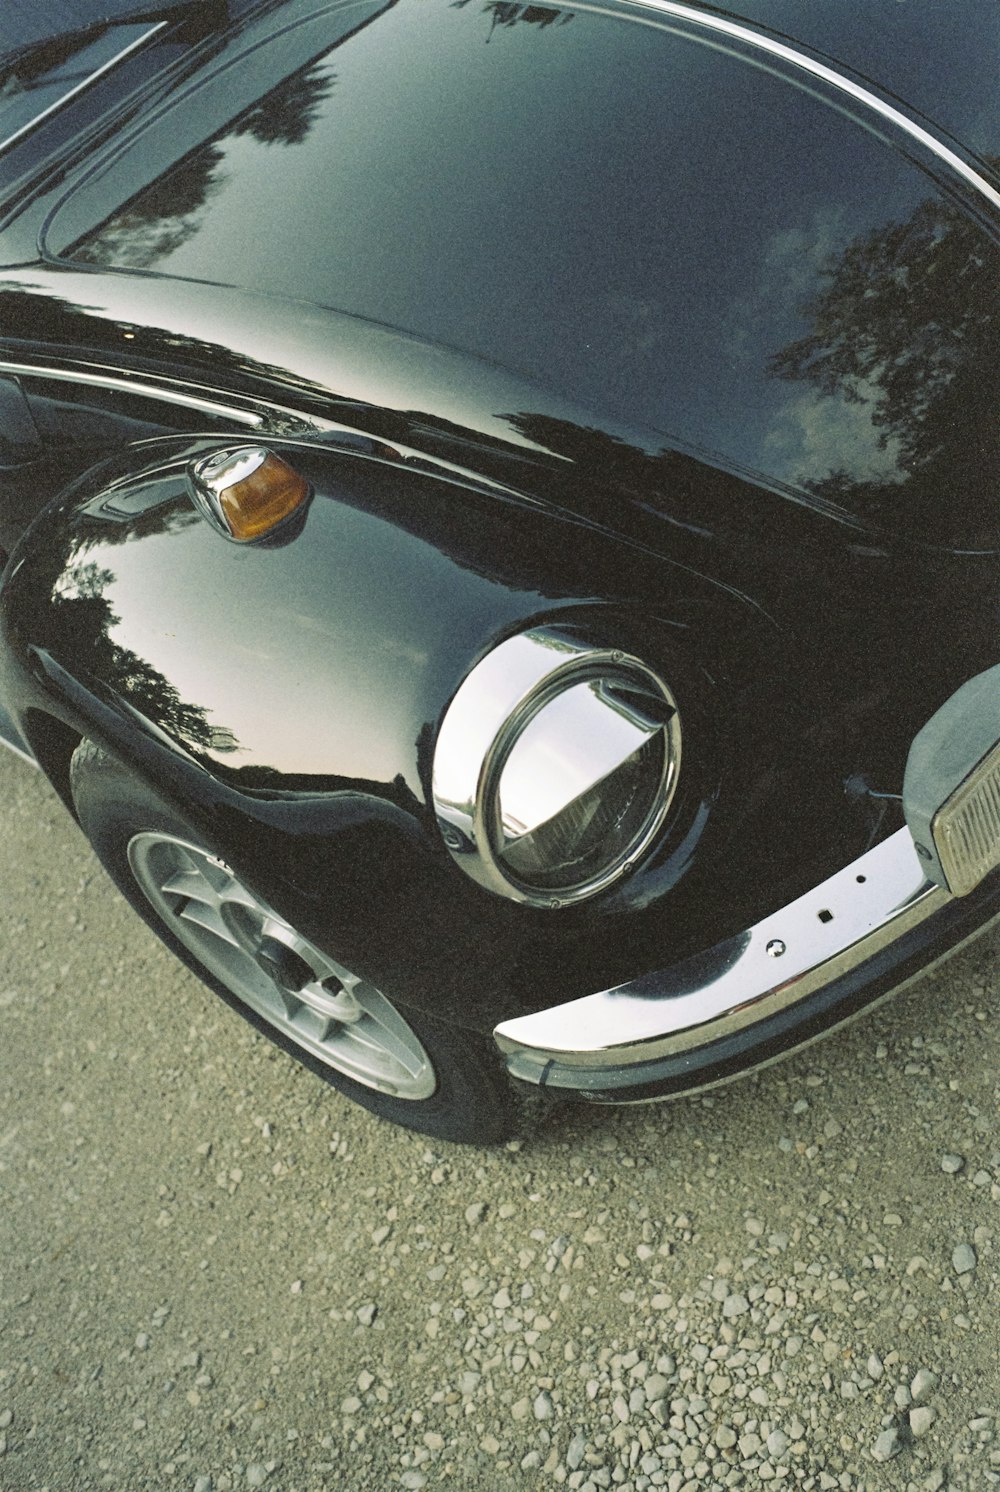 a close up of the front end of a black car